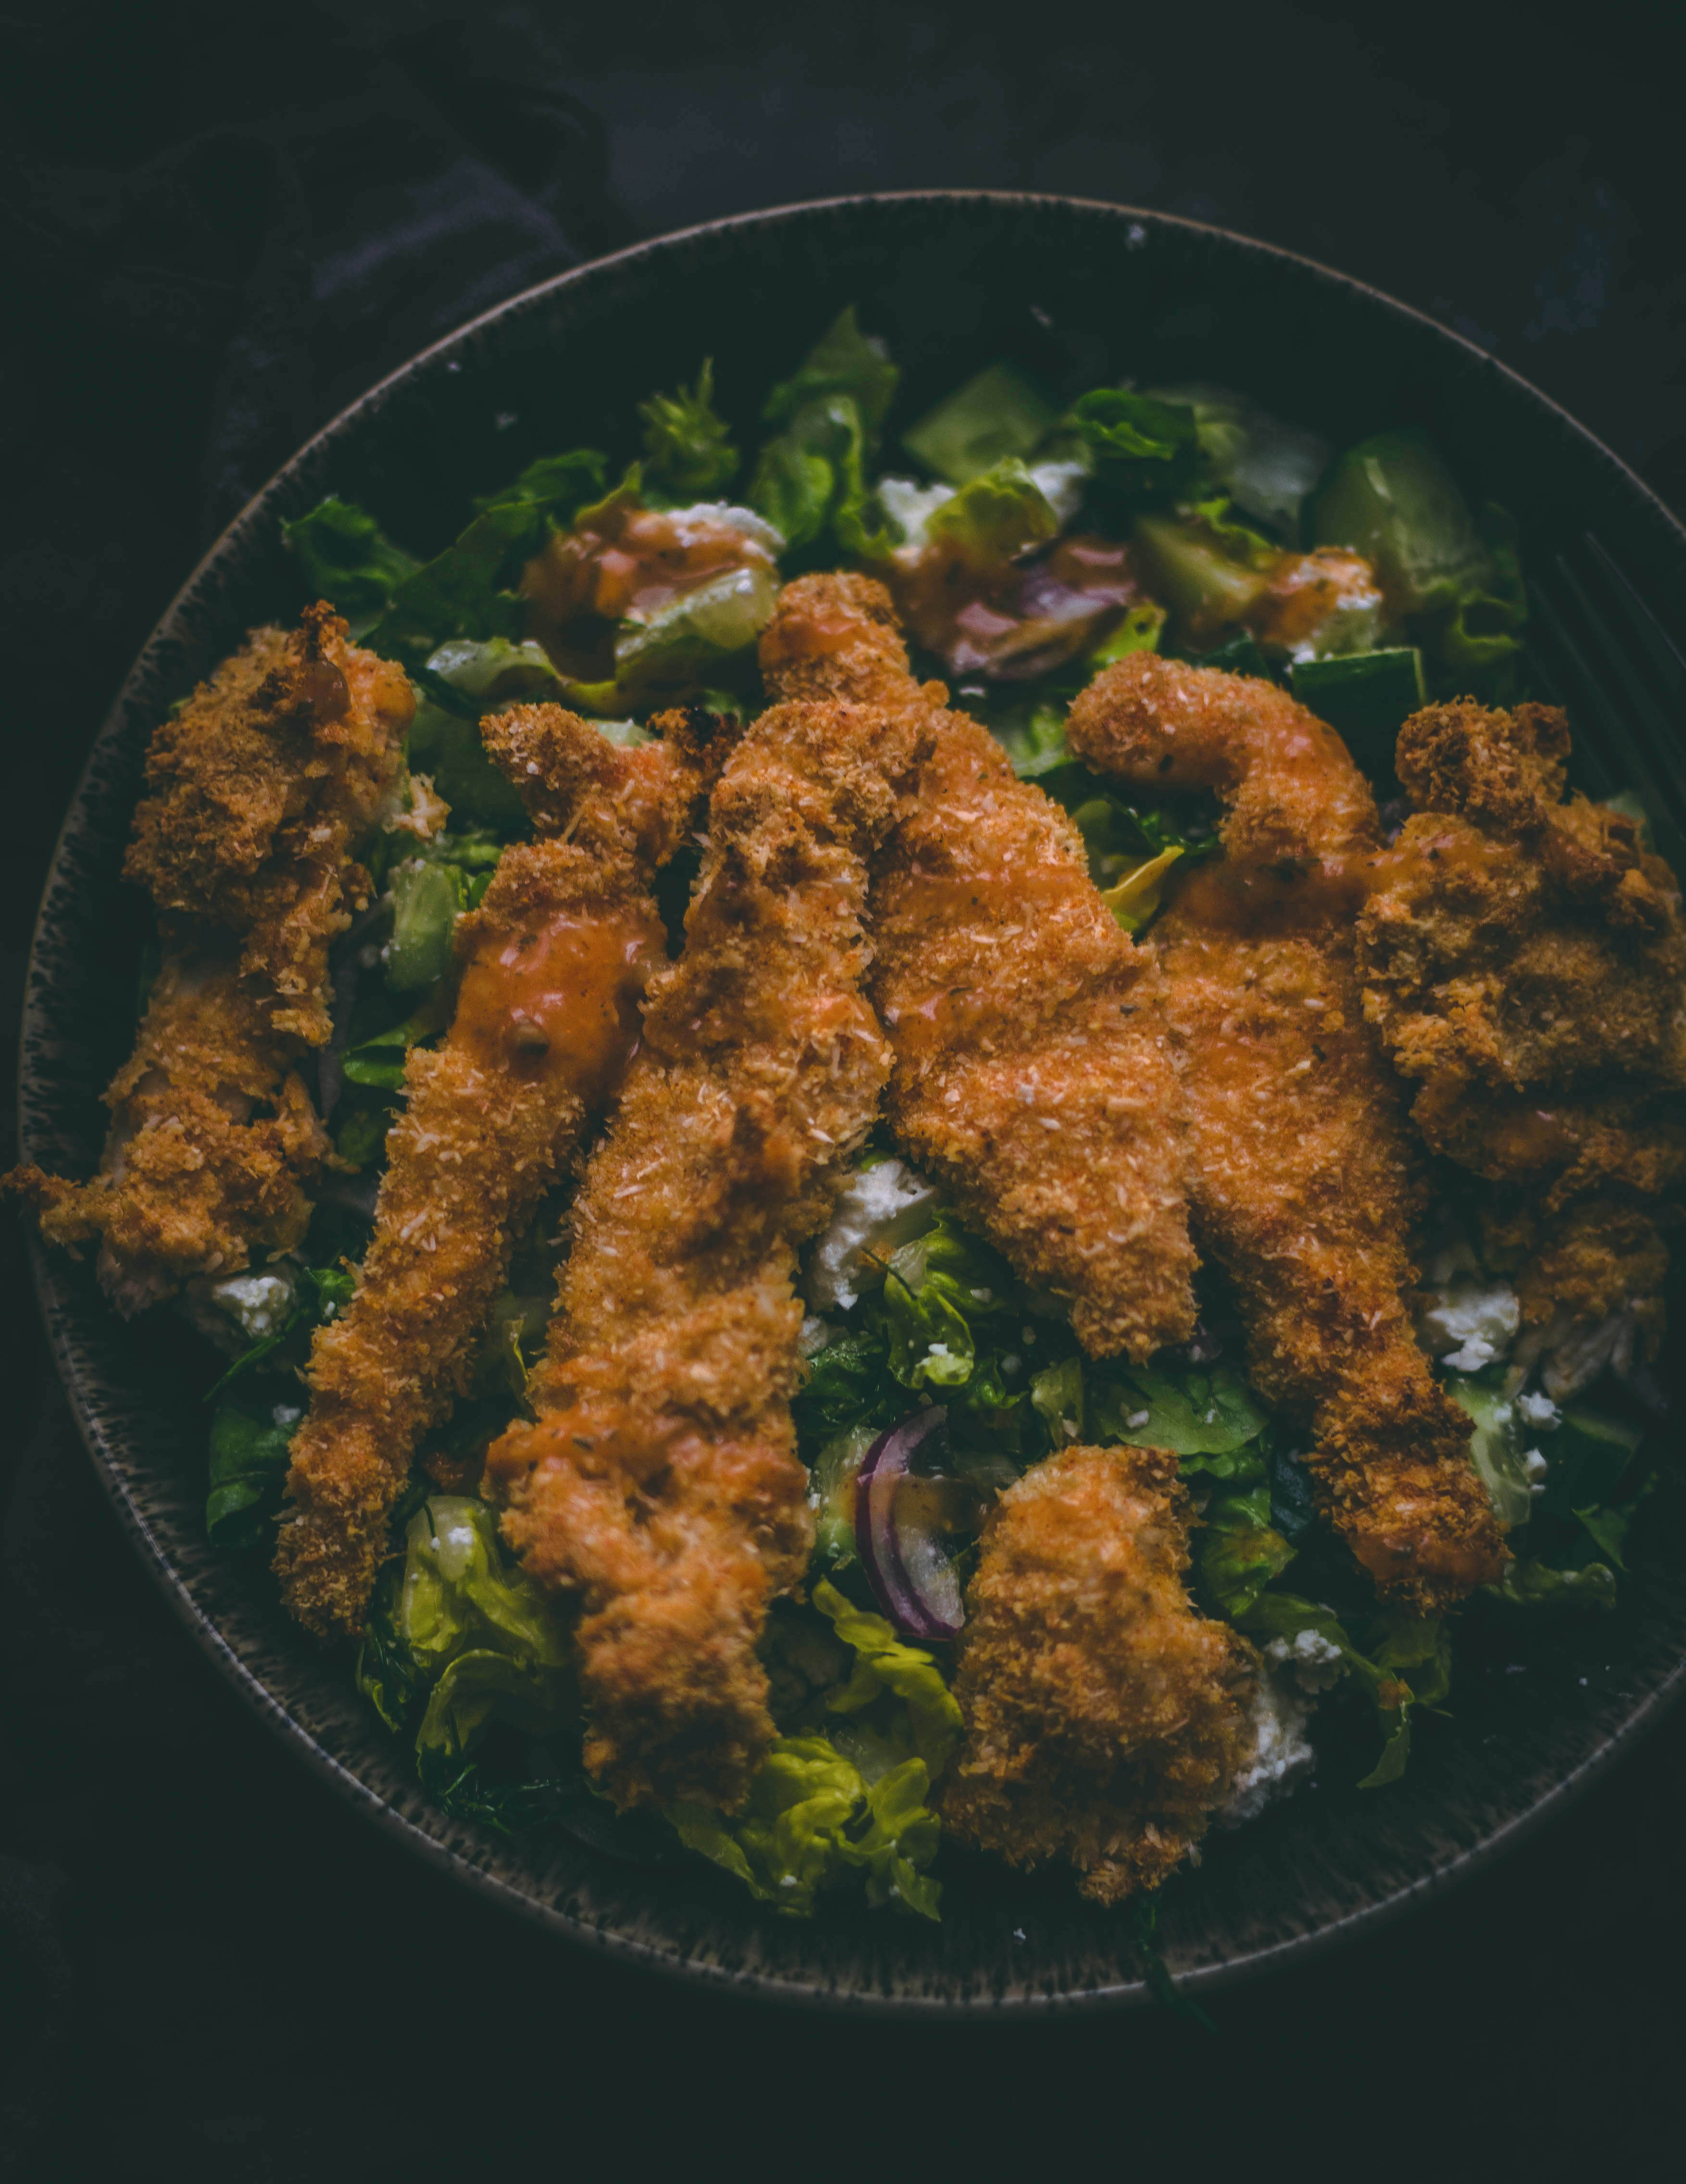 Crispy Almond Flour Chicken Strips on a bed of salad in a large bowl